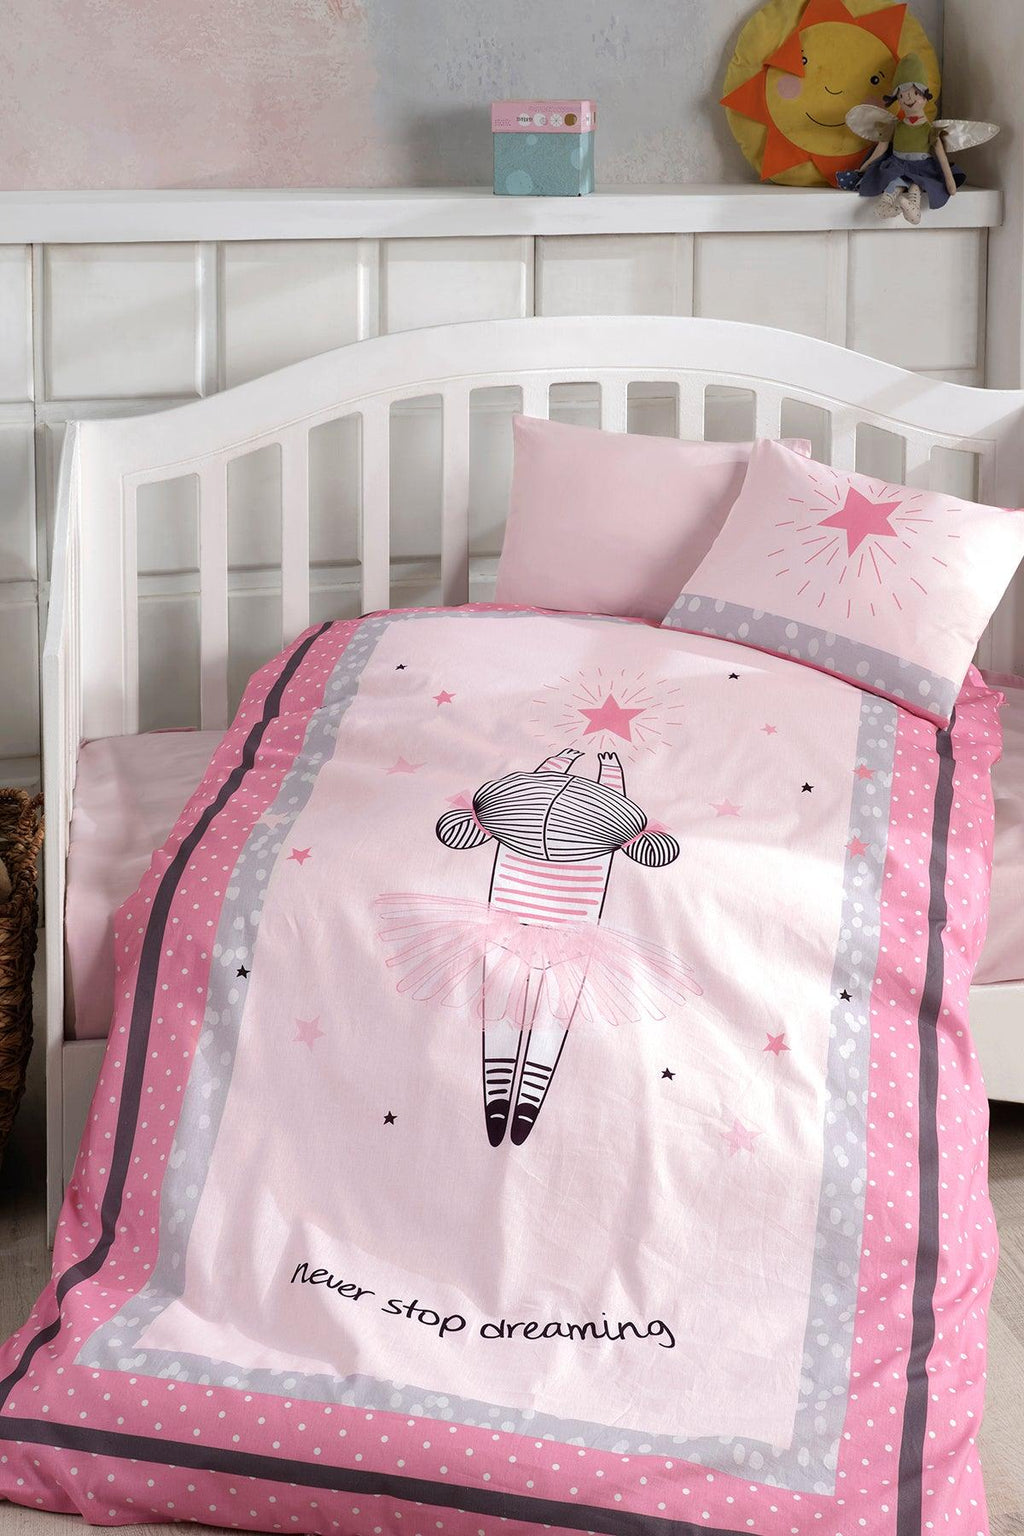 100% Turkish Cotton Baby Duvet Cover Set of 4  Size  Duvet cover: 100 cm x 150 cm  Flatsheet :120 cm x 160 cm  Pillows :35cm *45 cm each  Please note that the duvet is not included.  Product Details  Complete your little one's bedding with the cute panda design on the duvet set. Made from 100 % Turkish Cotton, our machine washable sets consist of a duvet cover, a flat sheet and two matching pillow cases. Little ones will absolutely enjoy snuggling into soft cotton fabric. Sweet dreams :)